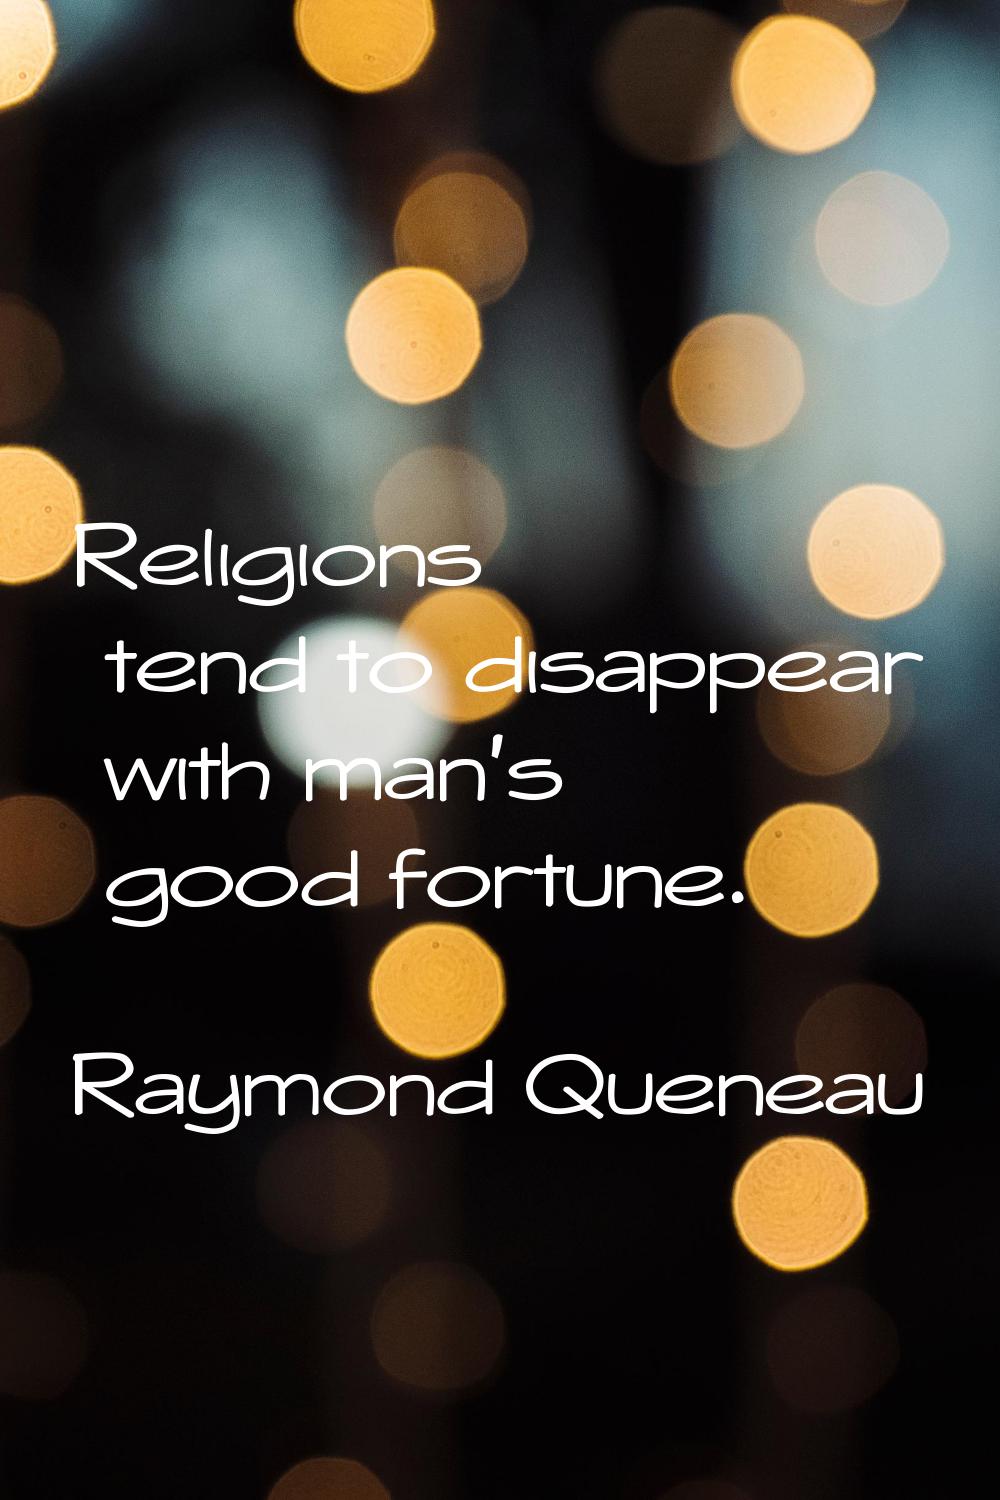 Religions tend to disappear with man's good fortune.